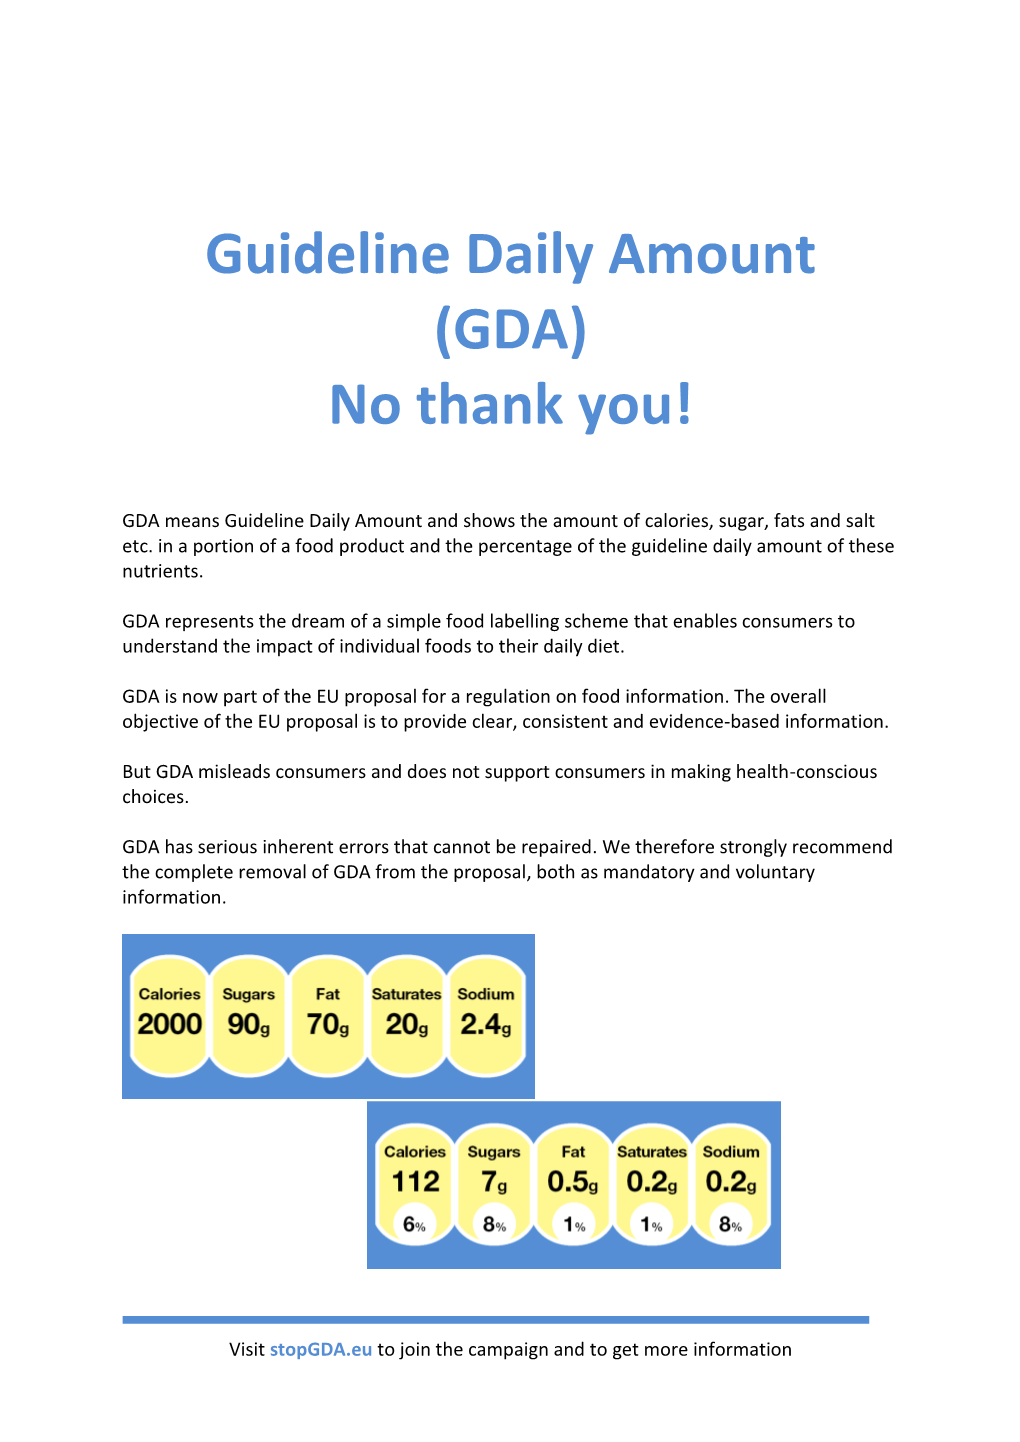 Guideline Daily Amount (GDA) No Thank You!